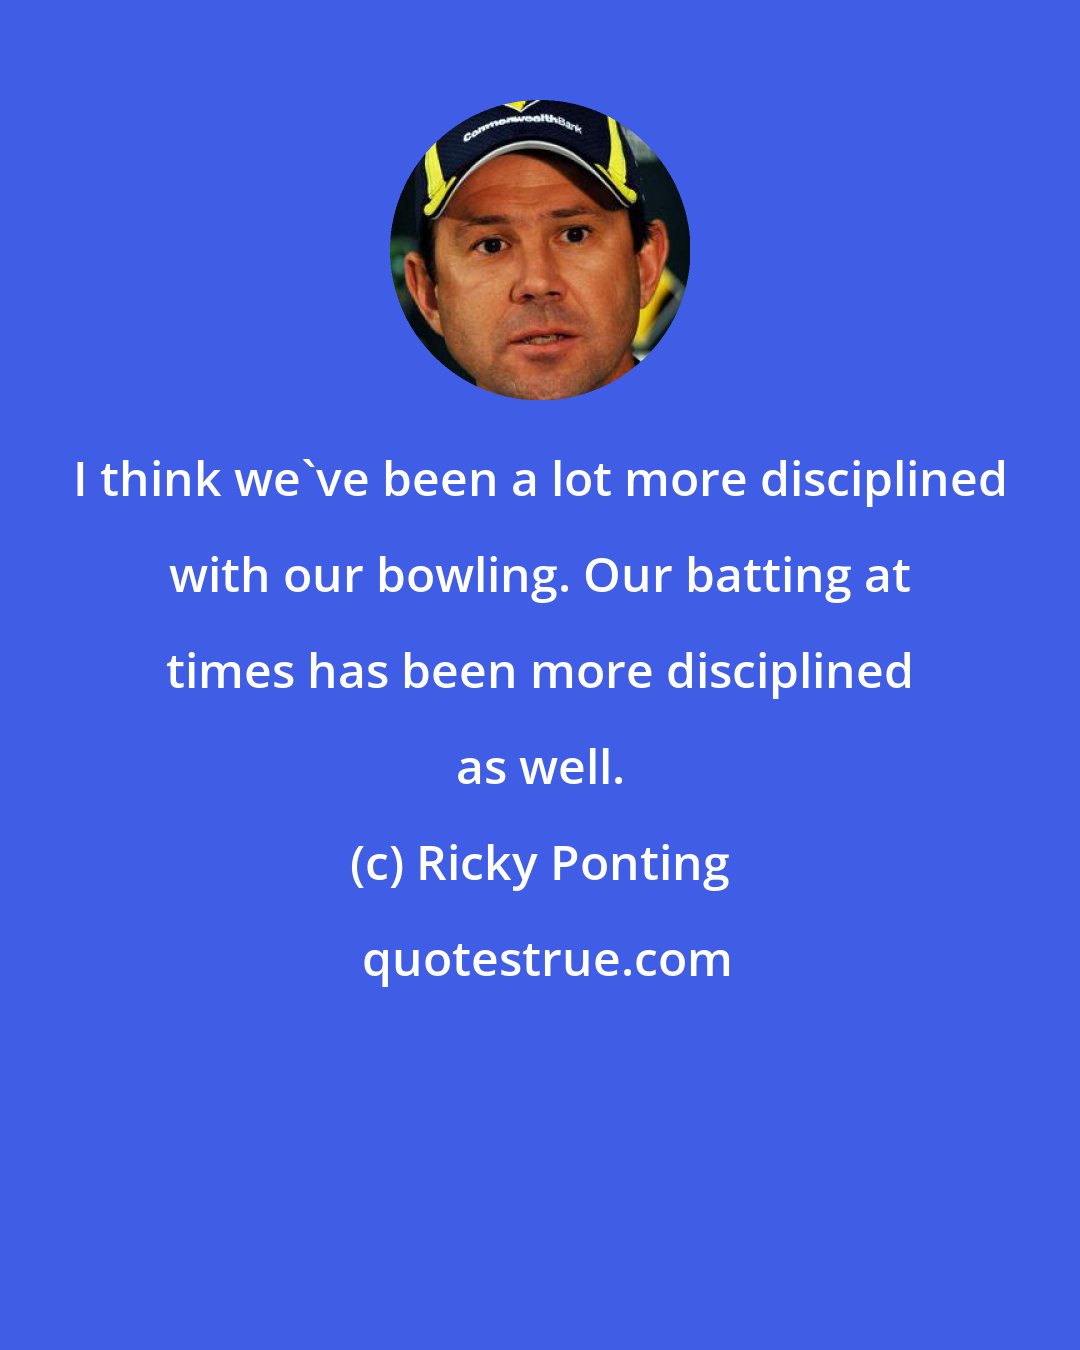 Ricky Ponting: I think we've been a lot more disciplined with our bowling. Our batting at times has been more disciplined as well.